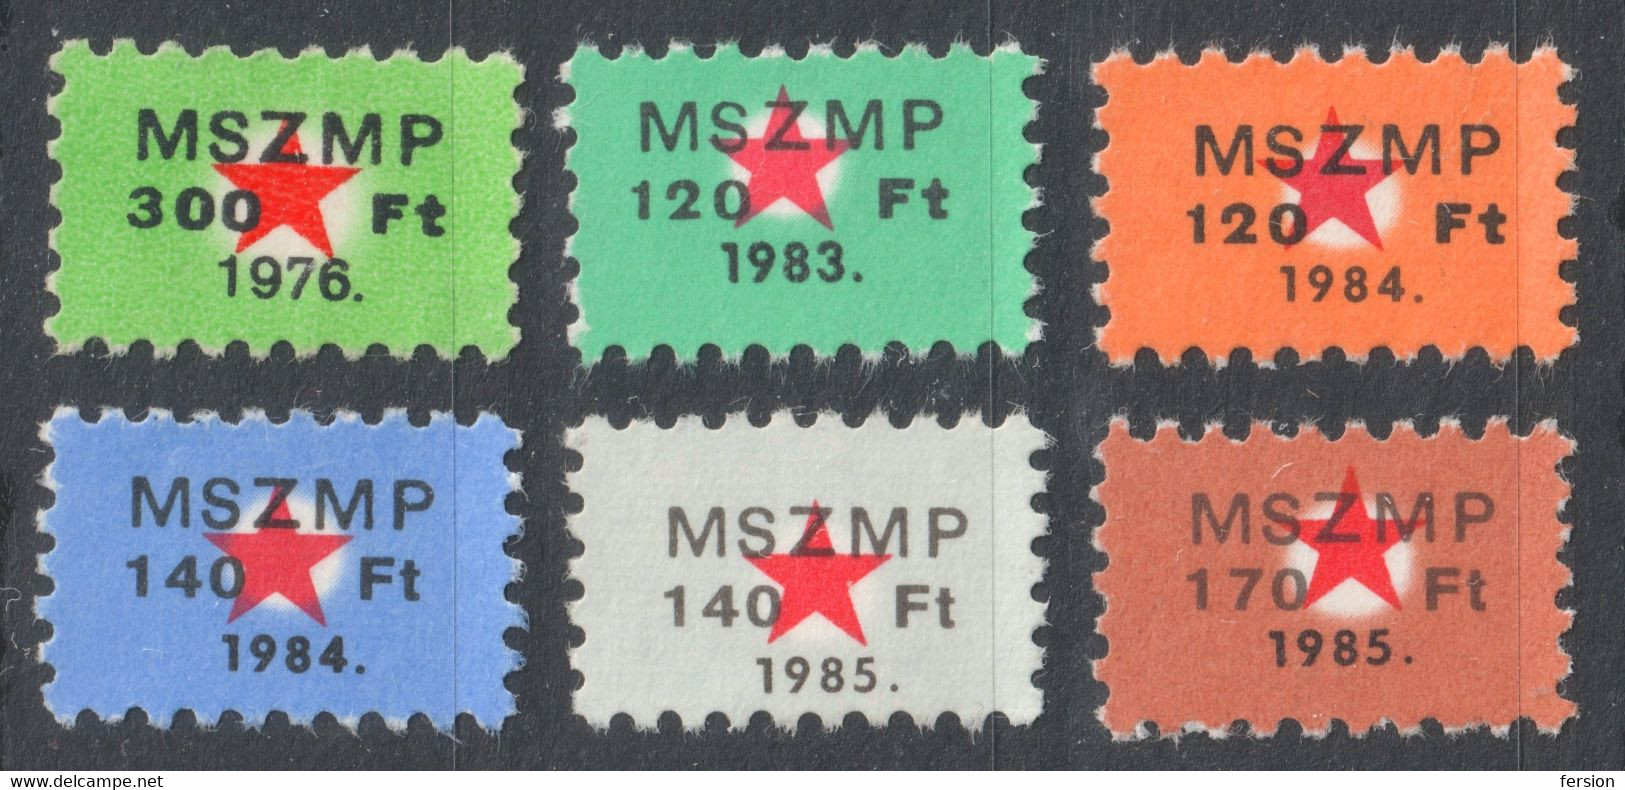 Communist Communism RED STAR Membership Stamp Hungarian Socialist Workers Party MSZMP Red Star HUNGARY Used LOT - Officials